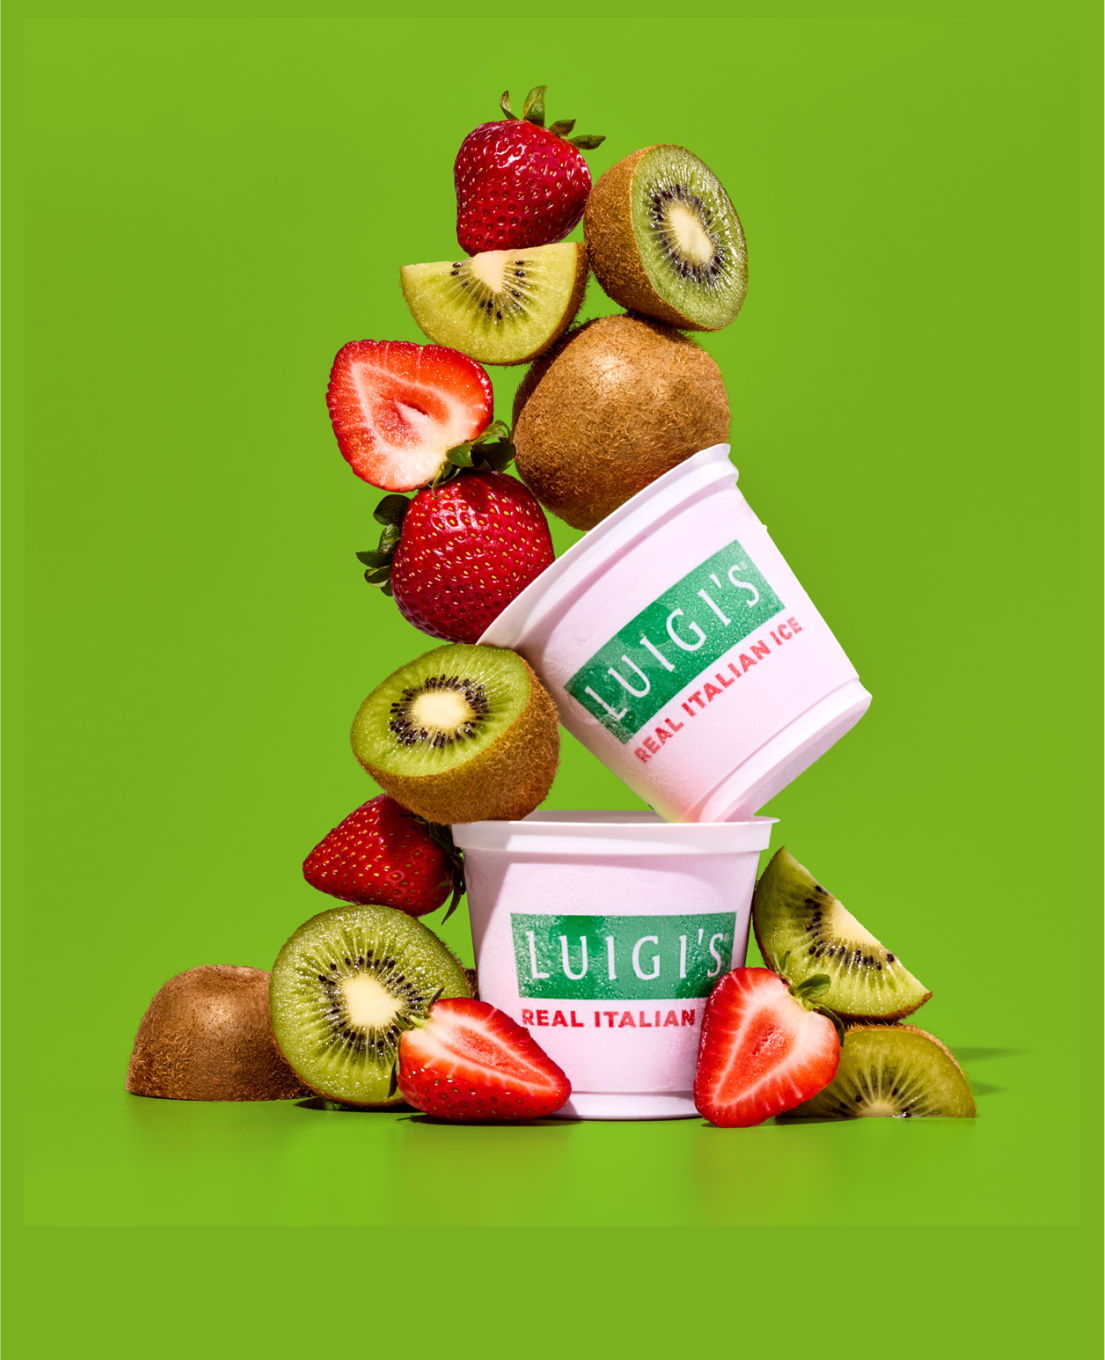 Two cups of LUIGI'S real Italian Ice are stacked on each other, while surrounded by kiwis and strawberries. The background is green.